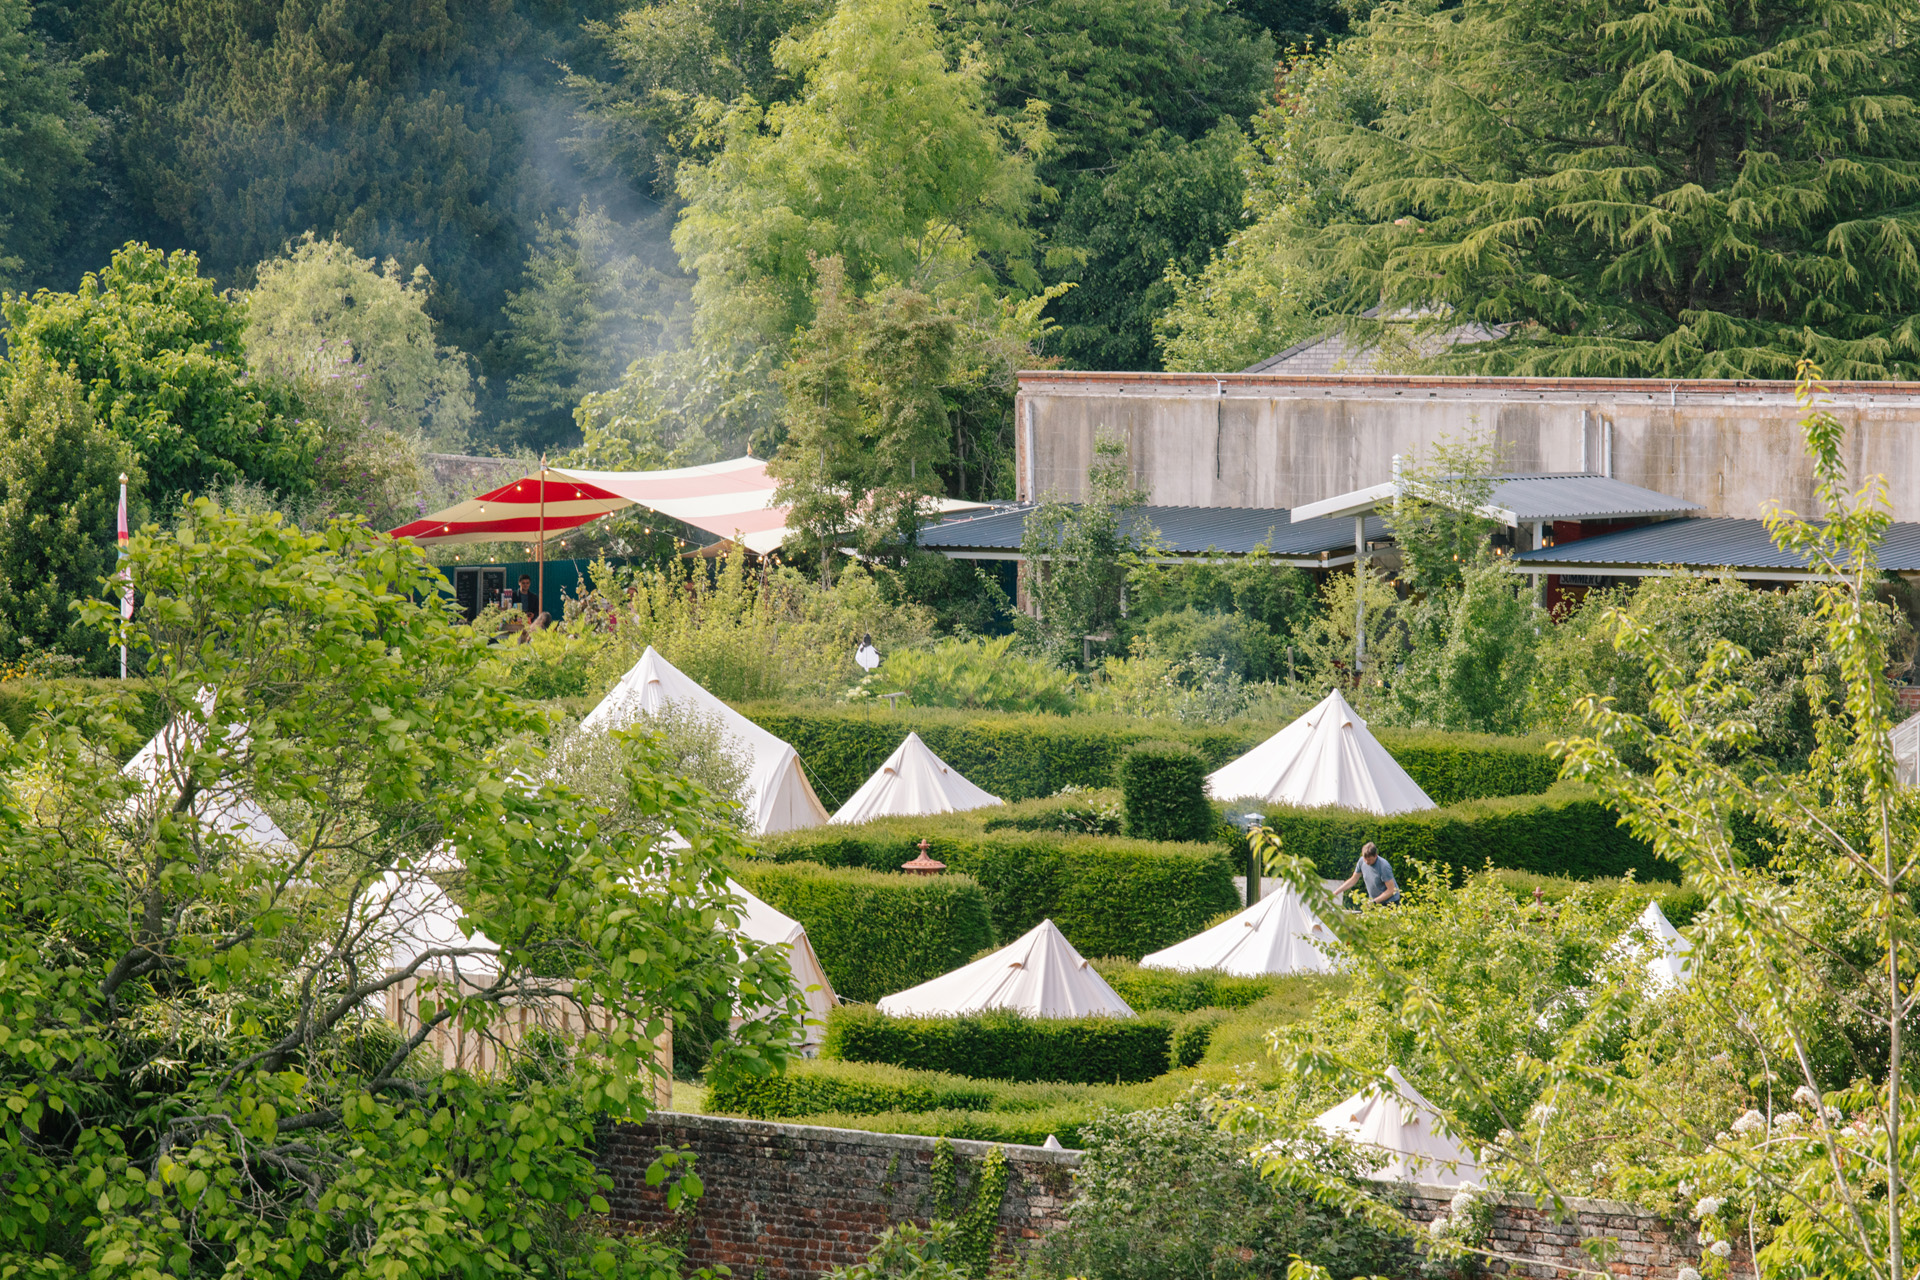 tents in a walled garden